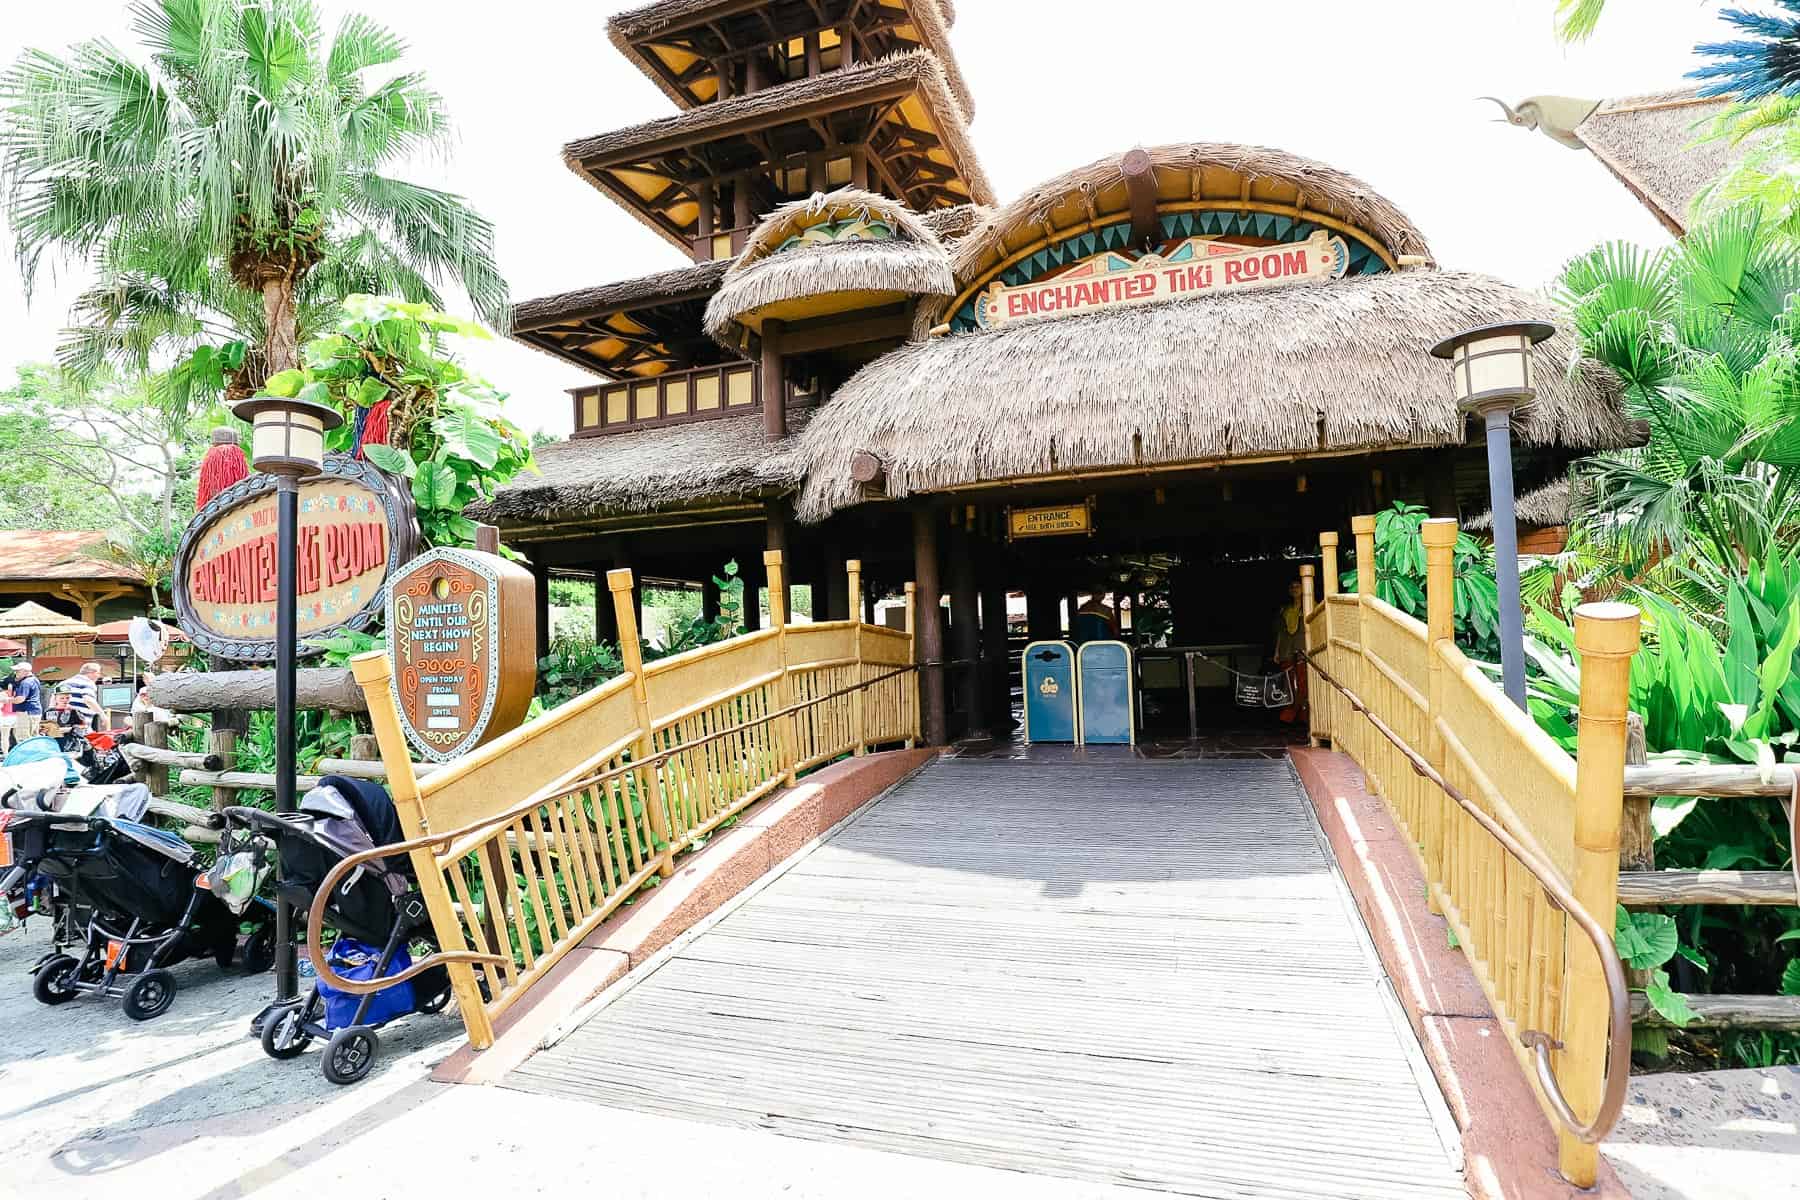 the entrance to the Enchanted Tiki Room 